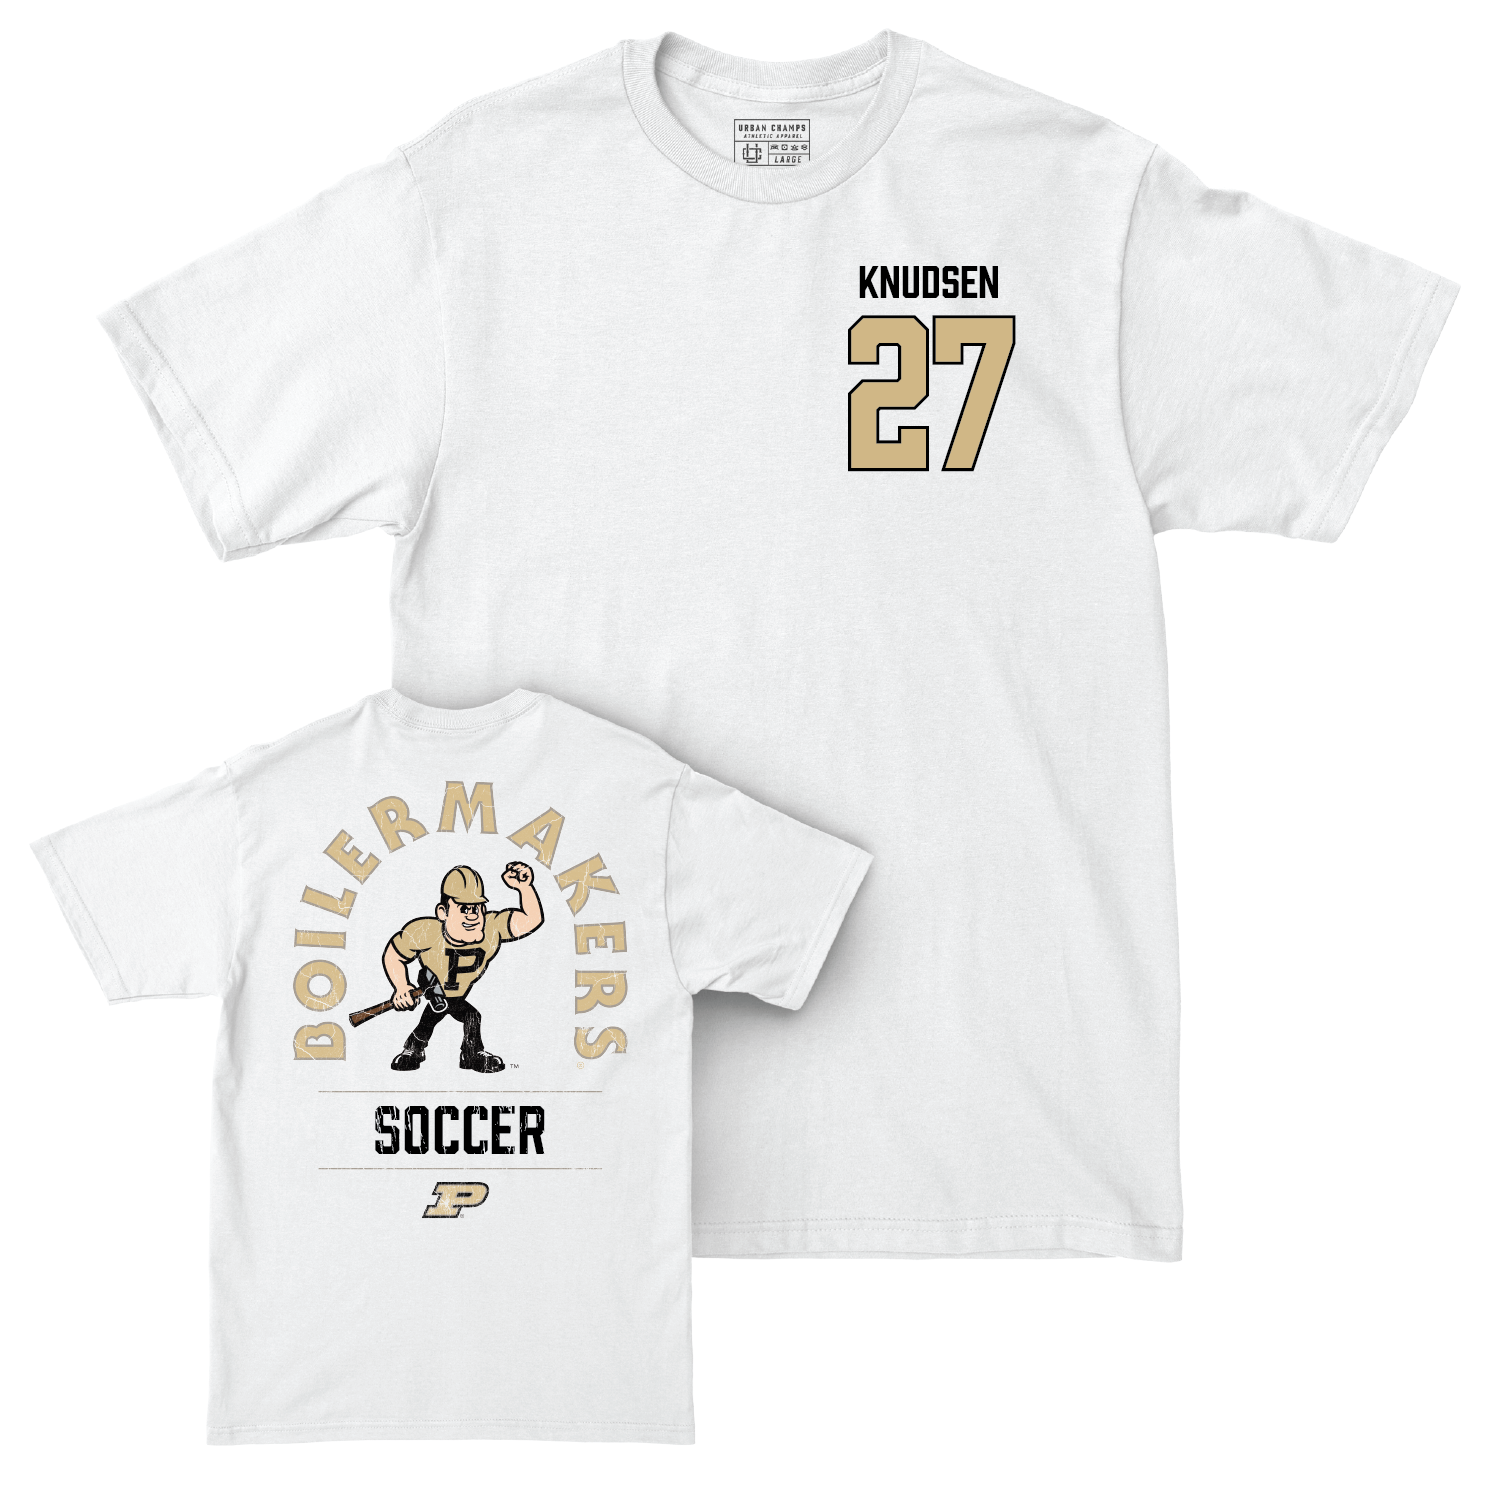 Women's Soccer White Mascot Comfort Colors Tee - Riley Knudsen | #27 Youth Small